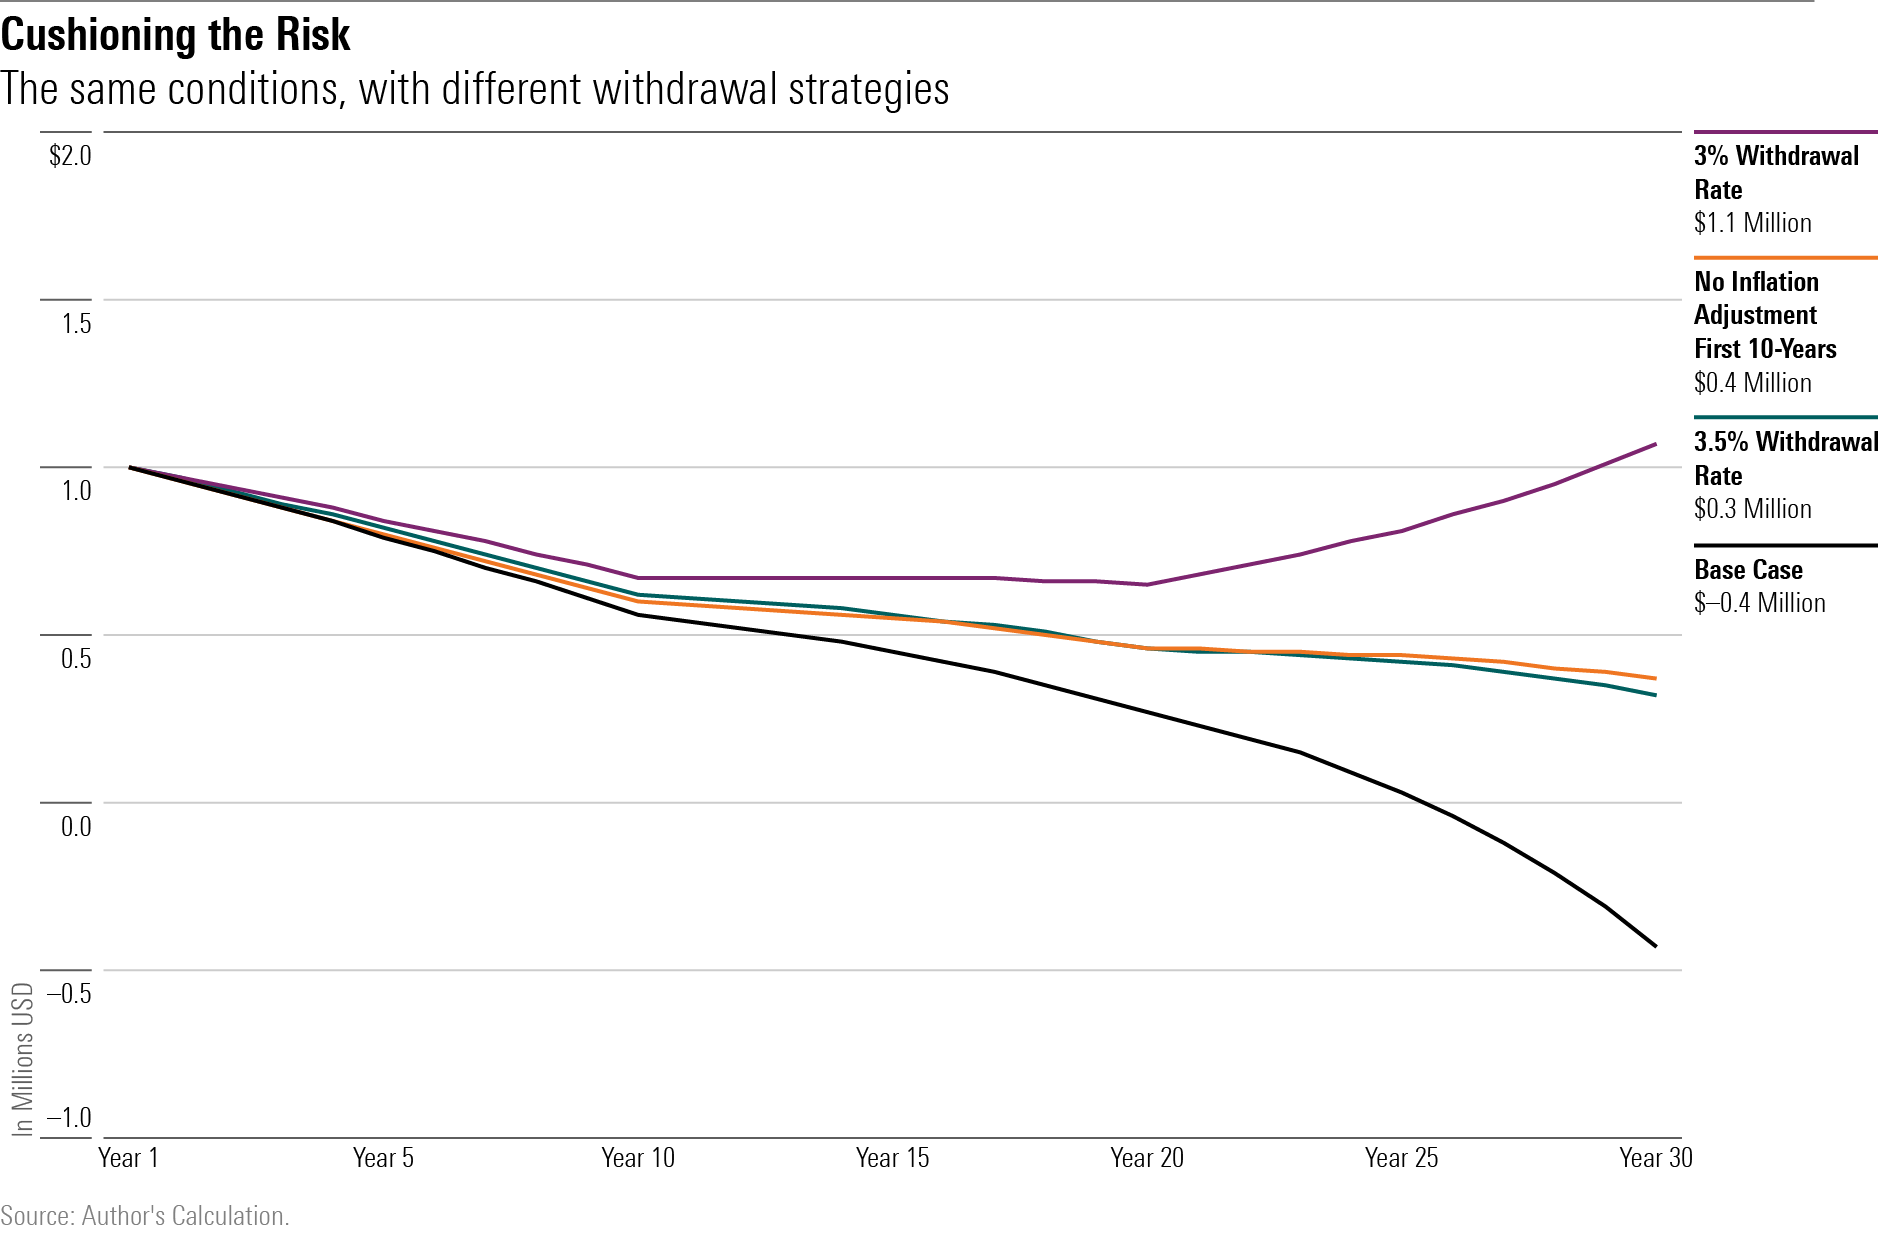 The 30-year outcome for four portfolios with different withdrawal strategies, assuming a 30-year time horizon.